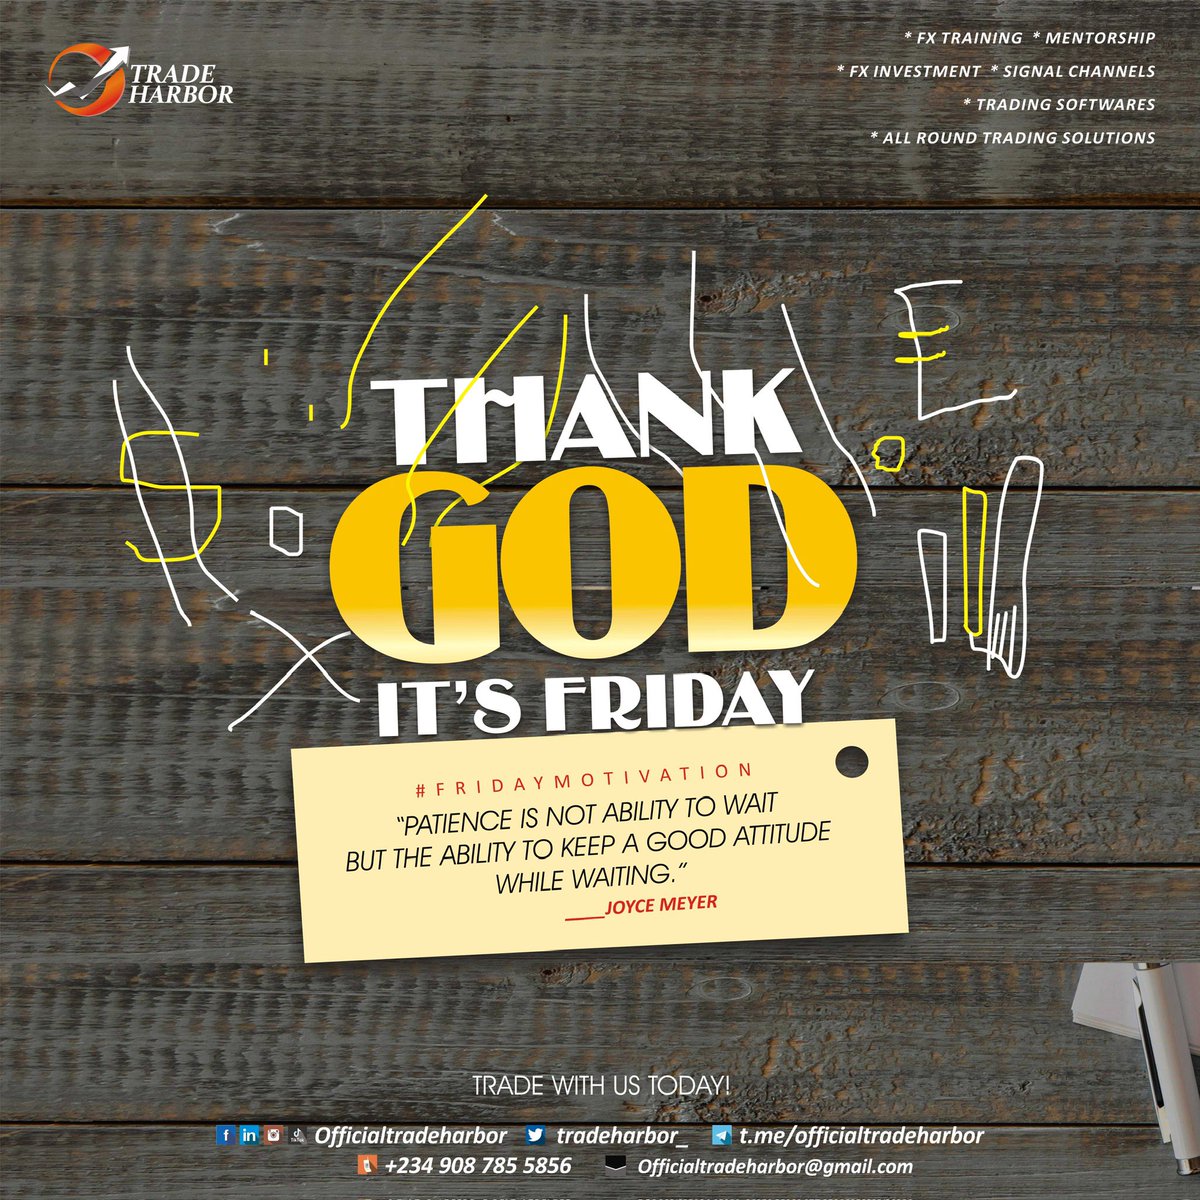 Thank God It’s Friday 

#ForexTrading #CurrencyMarkets #ForexAnalysis #FXSignals #TradingStrategy #ForexNews #CurrencyPairs #FXMarket #TradingTips #ForexCommunity #tgif